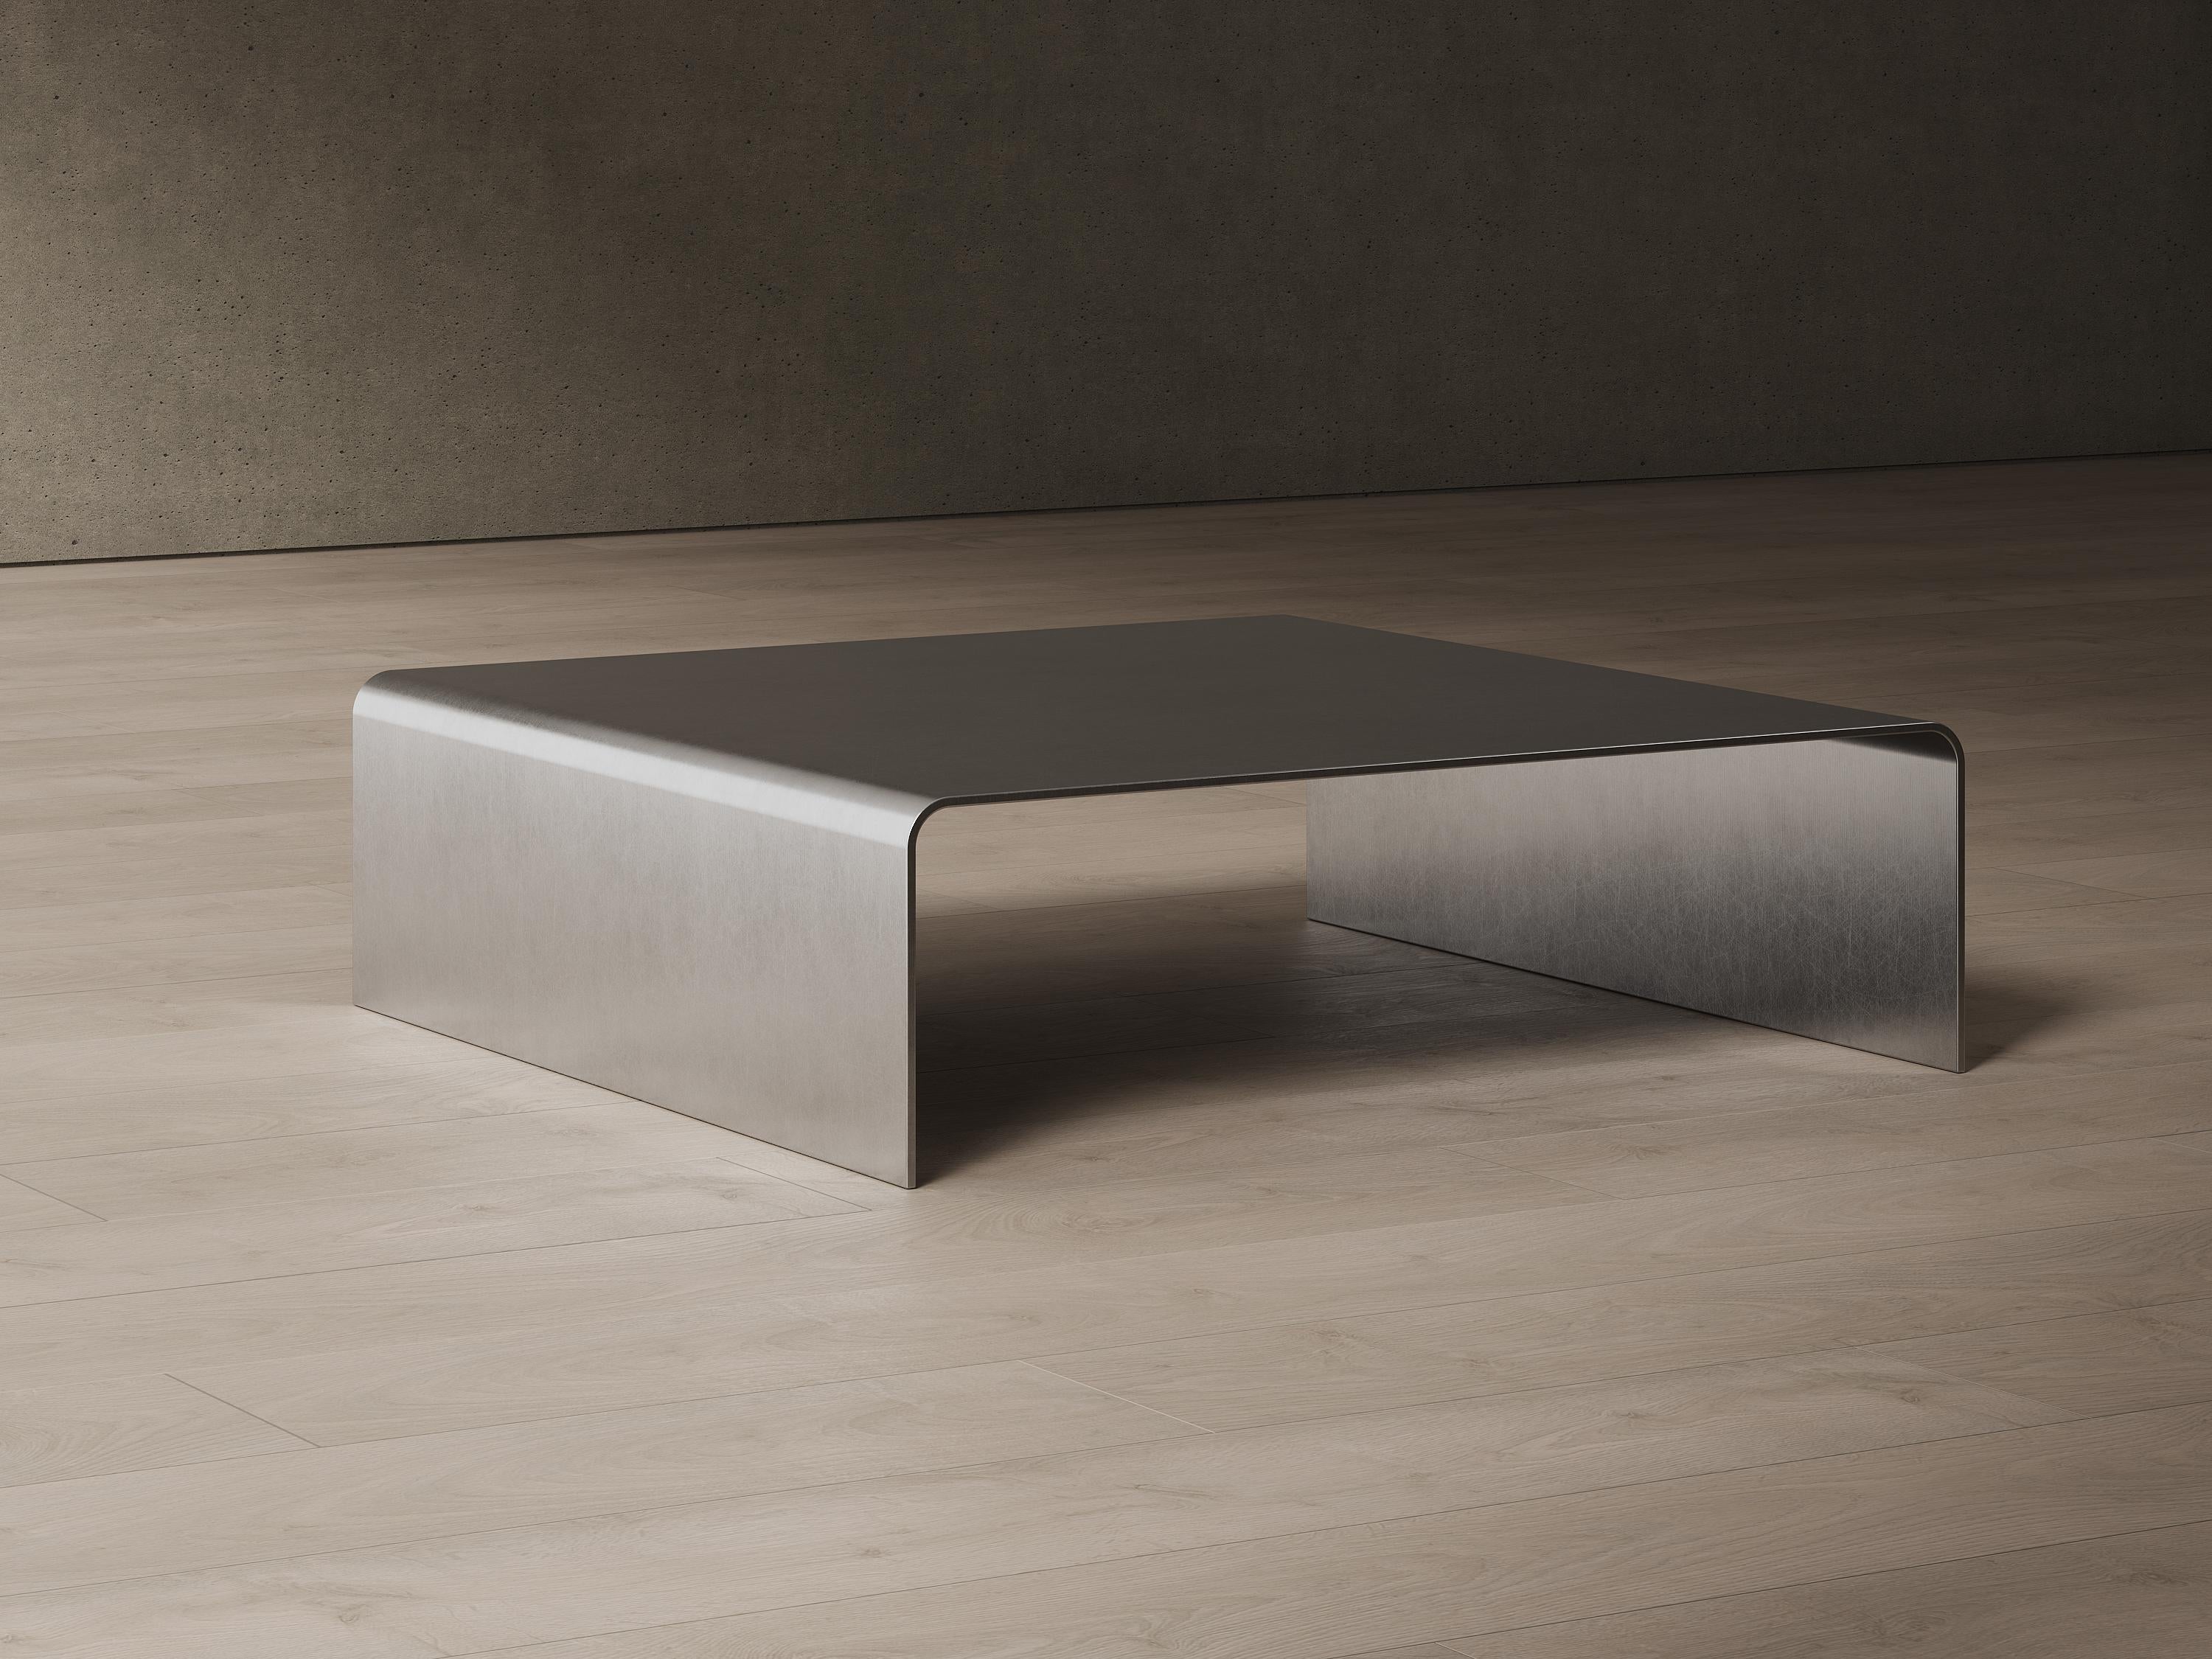 The Bend table portrays simplicity and elegance. It is made of a single sheet of 6mm stainless steel, creating a piece that has no screws or fixings. It comes in brushed stainless steel. Custom finishes are available upon request. Proudly made in